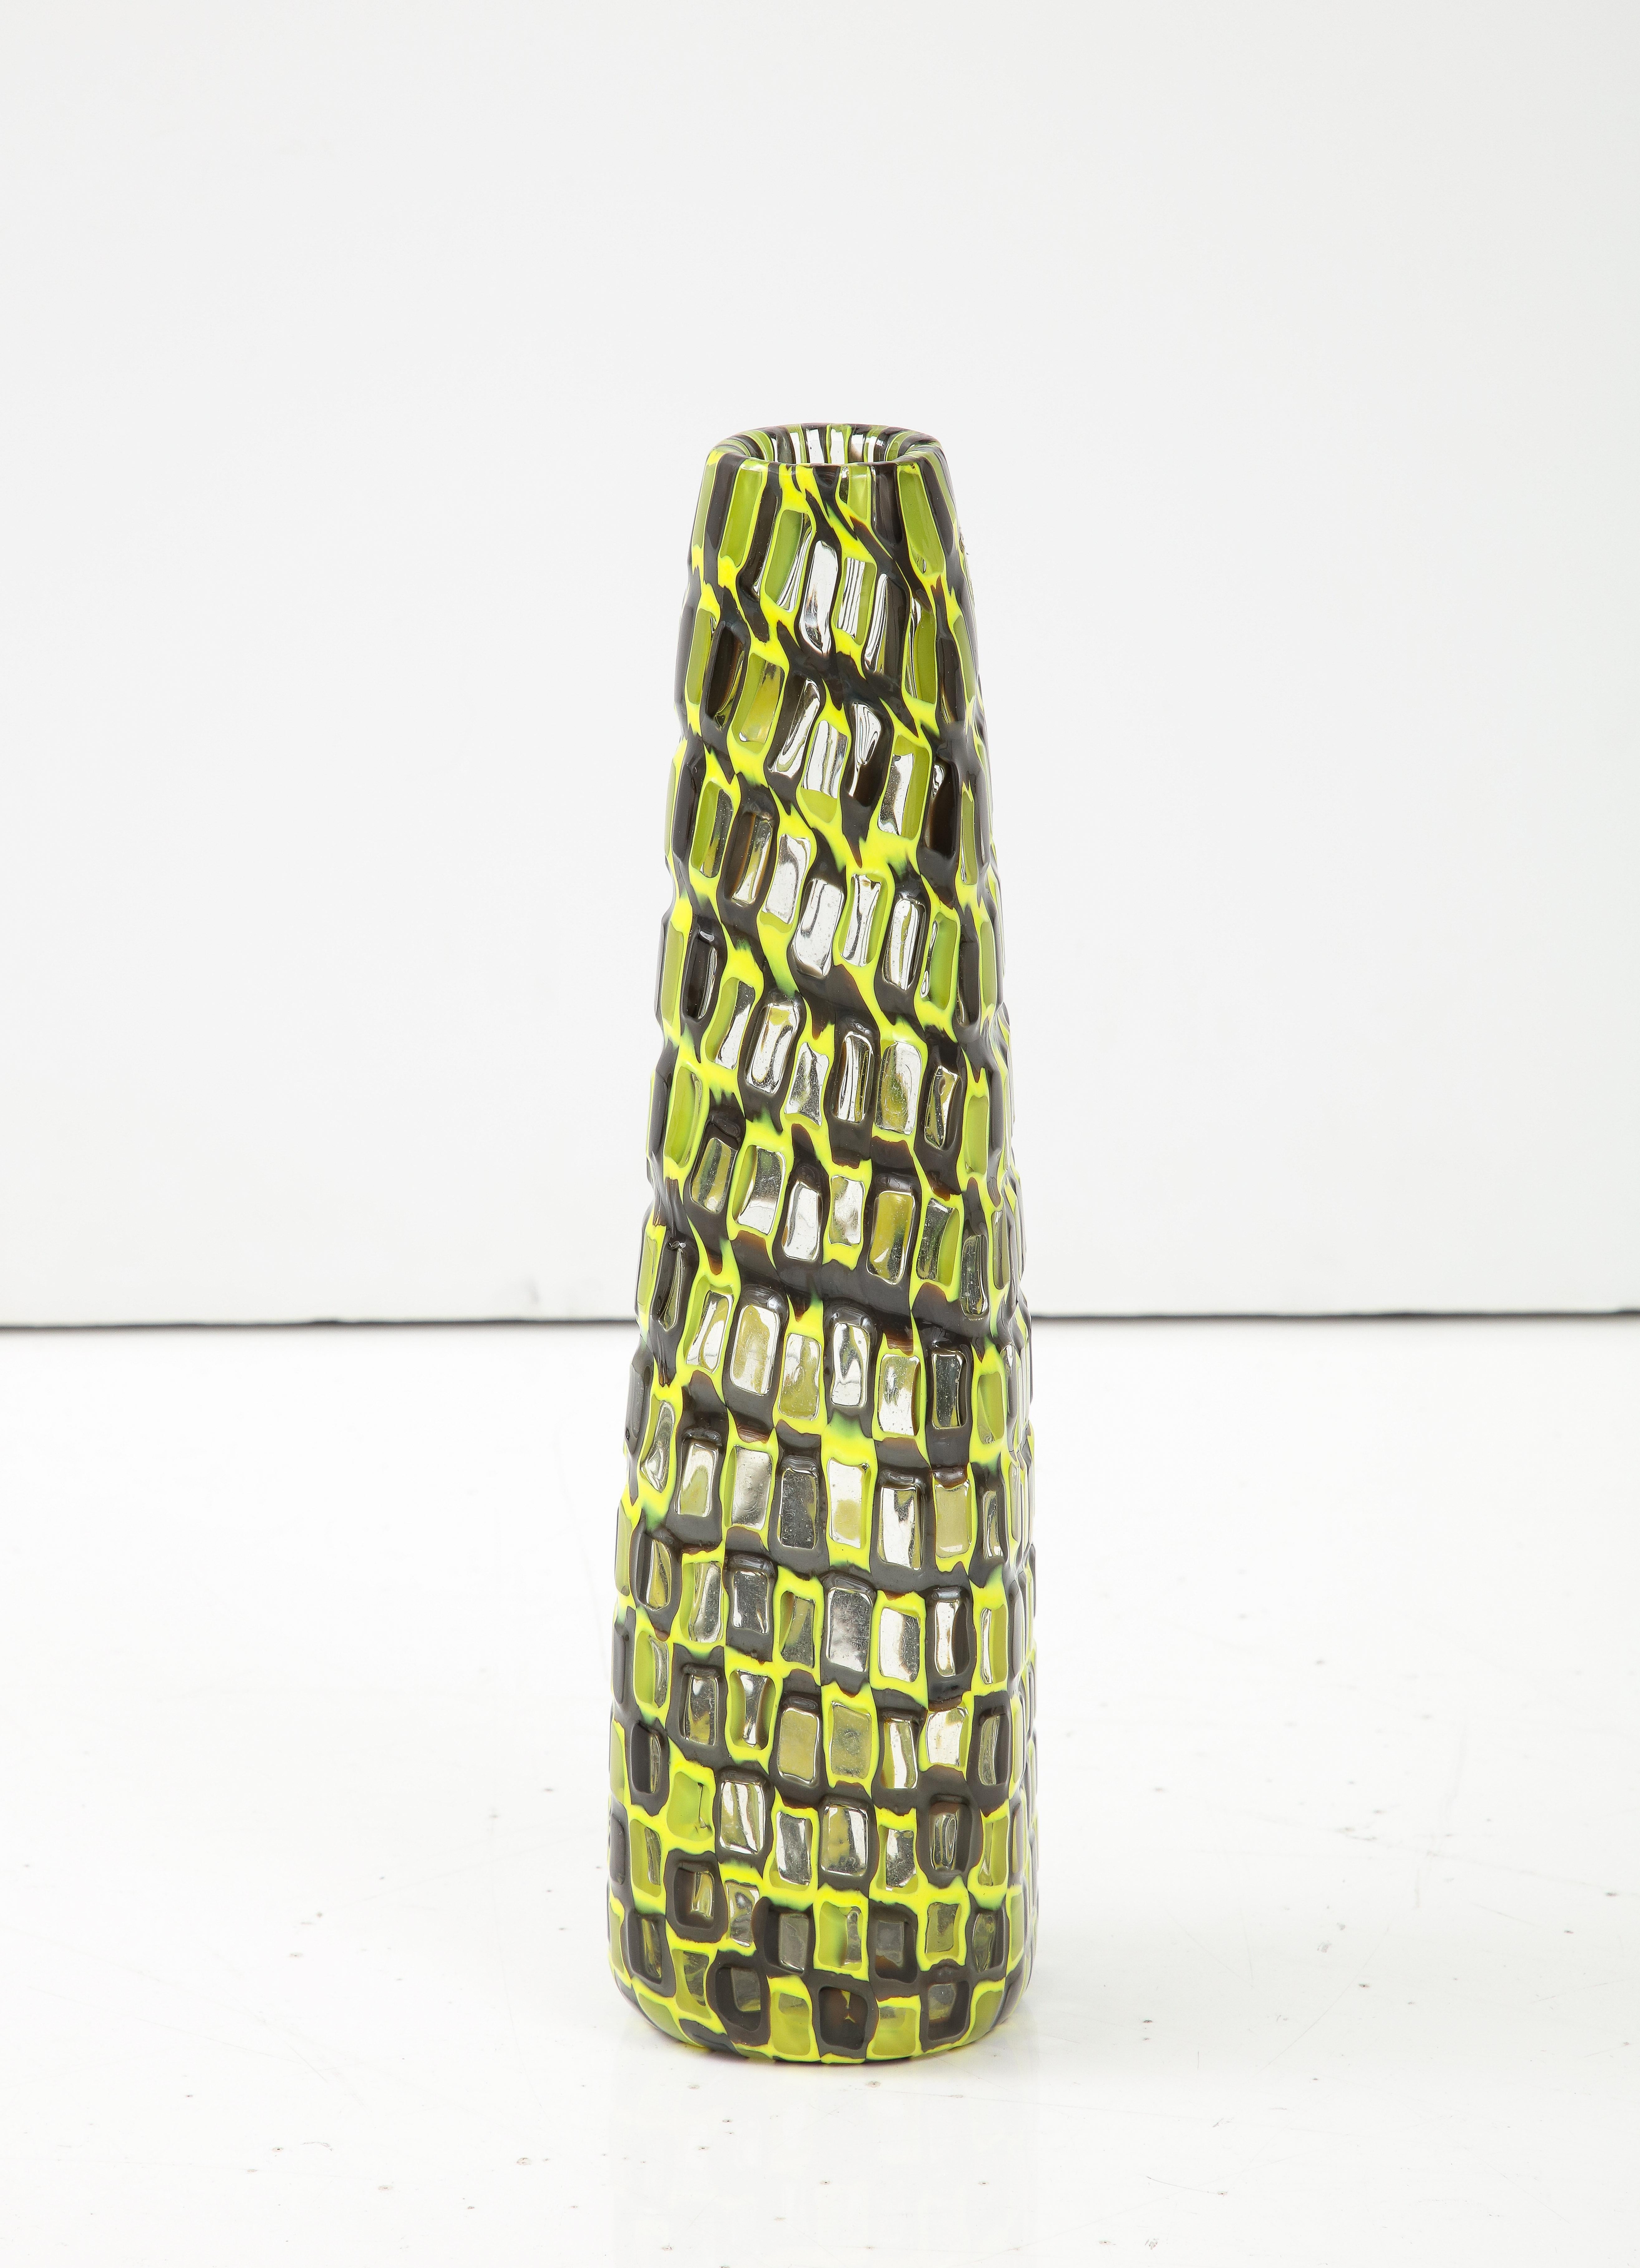 Artisan hand blown Murano glass vase featuring striking colors of chartreuse and bark brown/grey. The colors forming rectangular frames surrounding the clear background. Signed on bottom, Venini, '90.